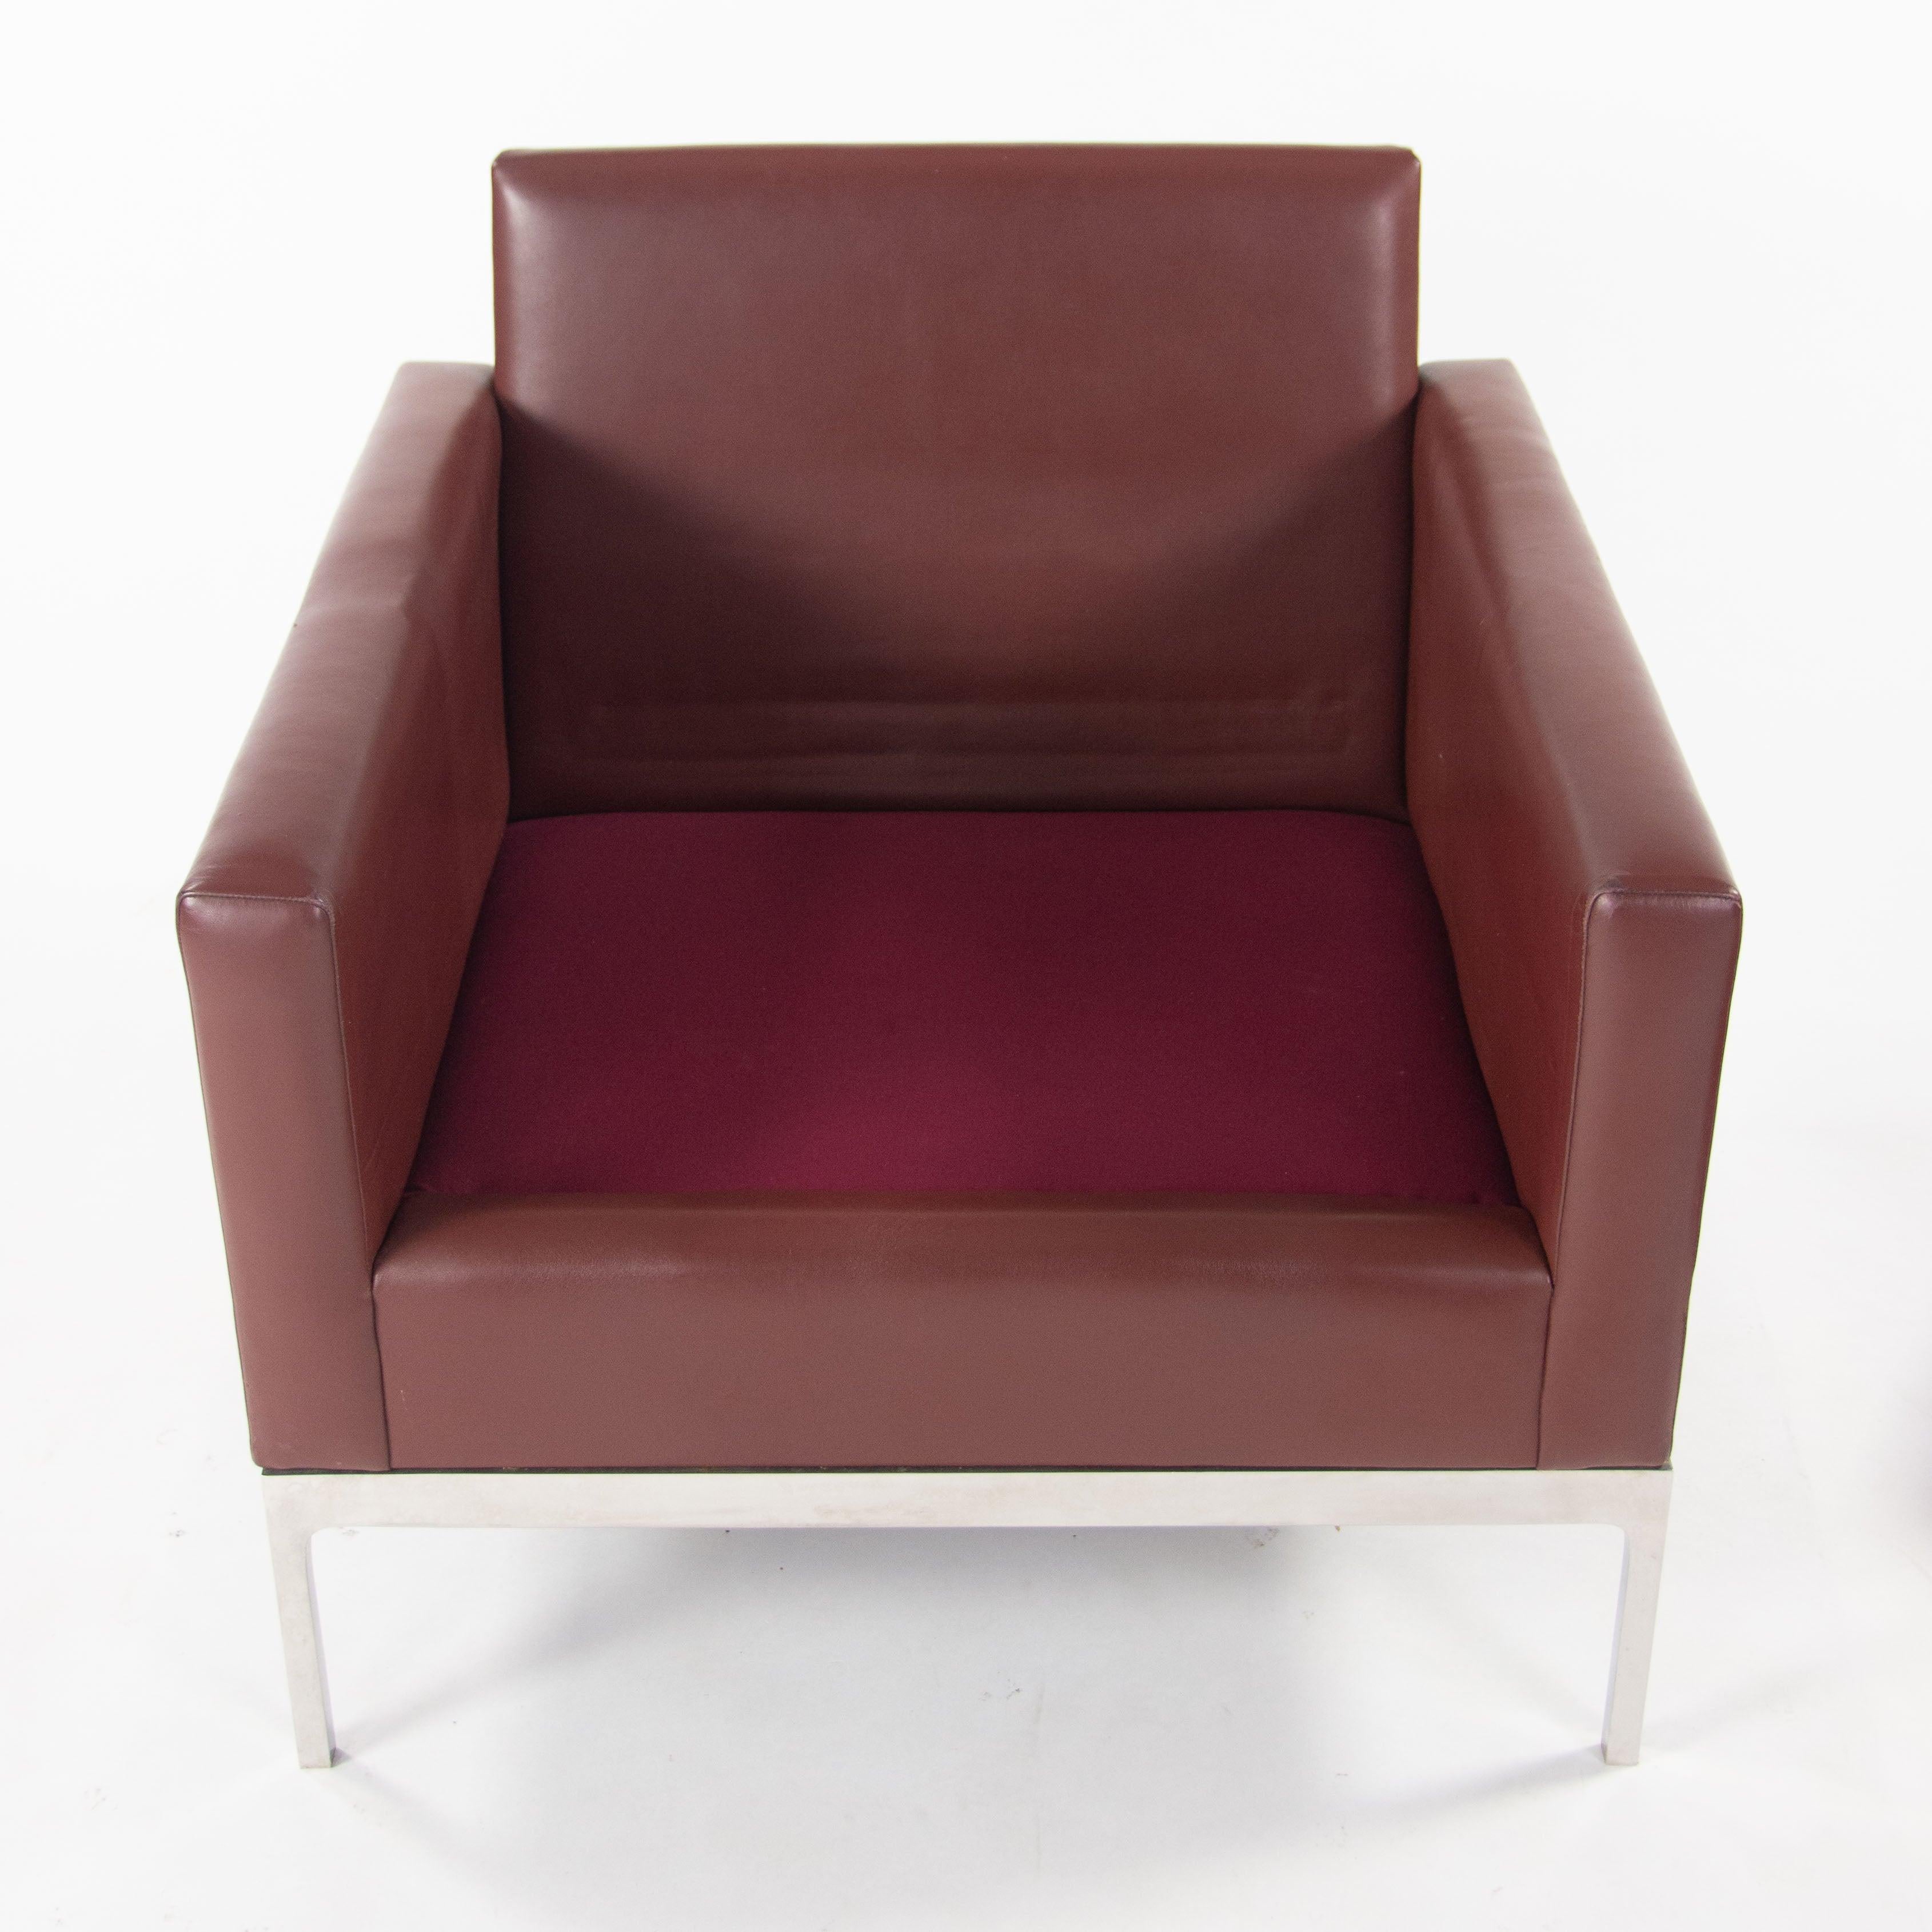 Nicos Zographos Red Leather 70 Club Chair Armchair with Polished Stainless Legs In Good Condition For Sale In Philadelphia, PA